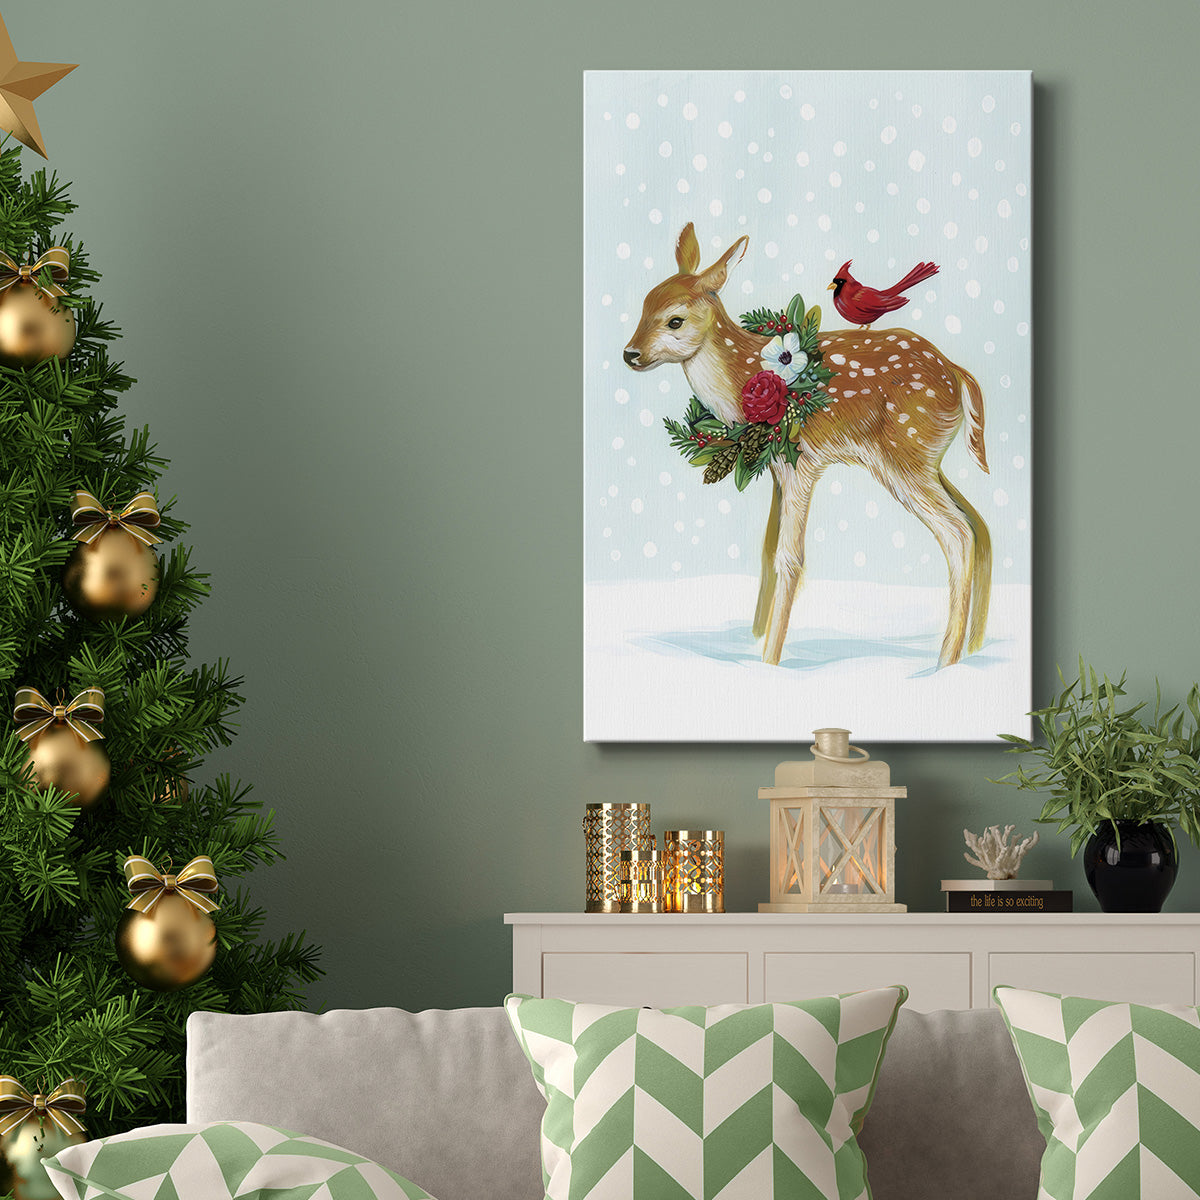 Winter Woodland Creatures with Cardinals II - Gallery Wrapped Canvas